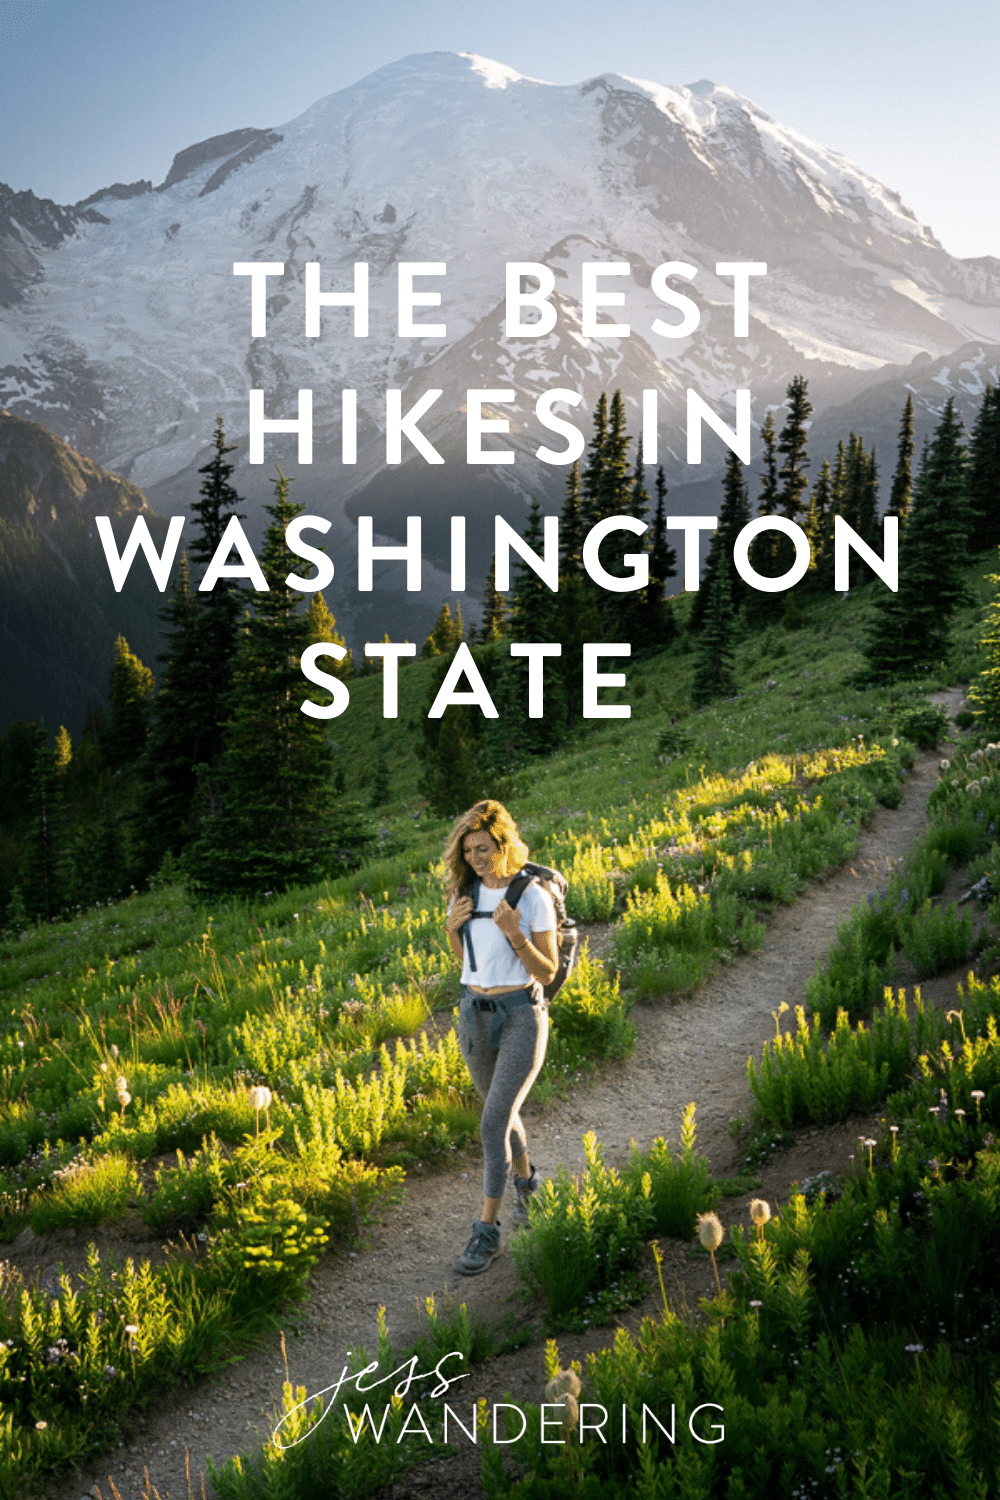 The best hikes in Washington State.